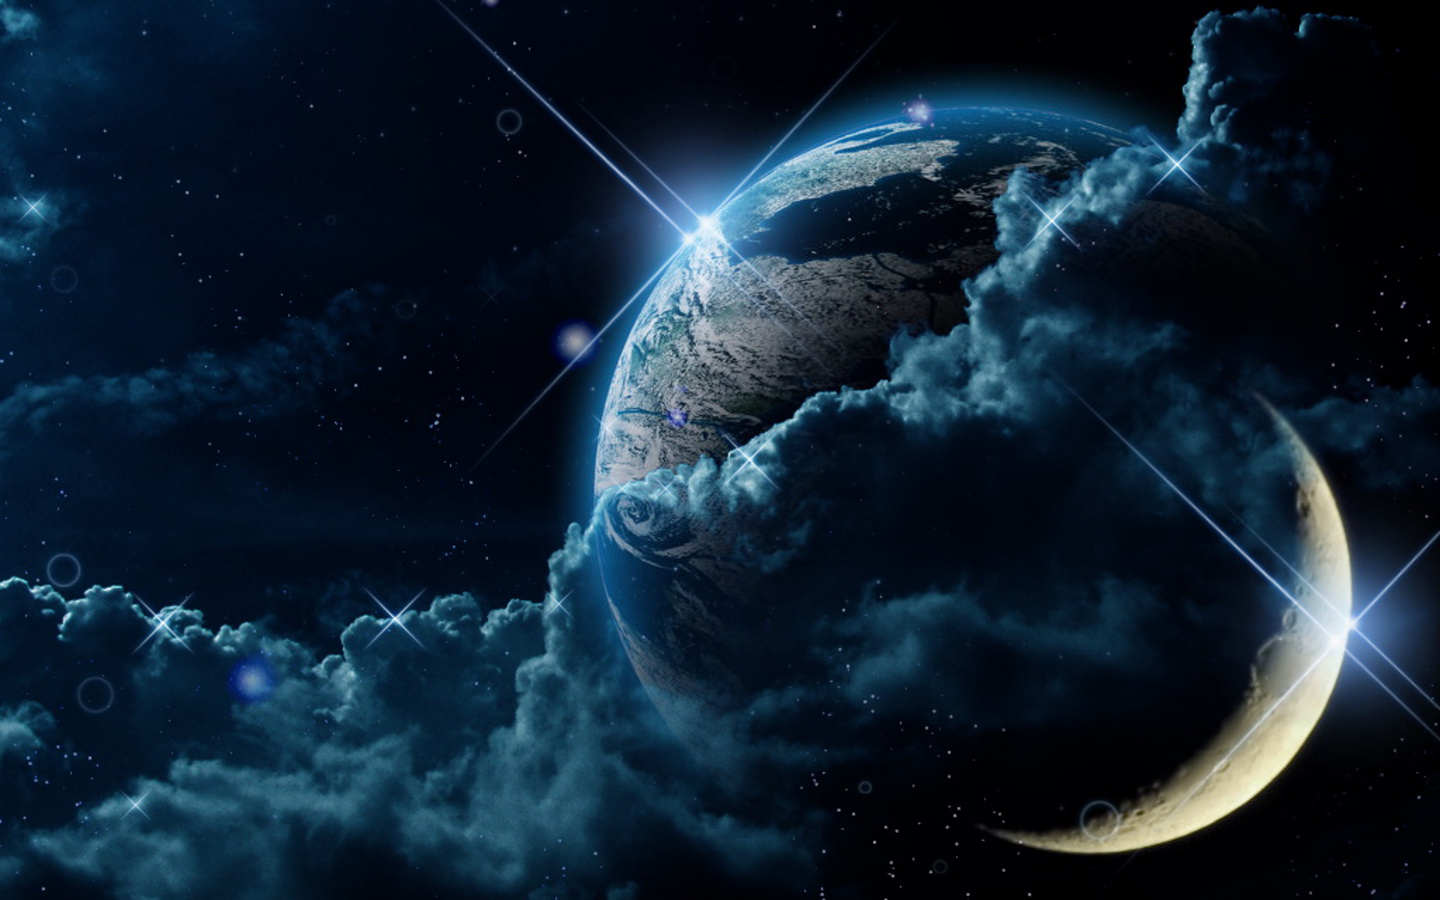  Fantasy Mysterious Space Wallpaper 1440x900 Full HD Wallpapers 1440x900